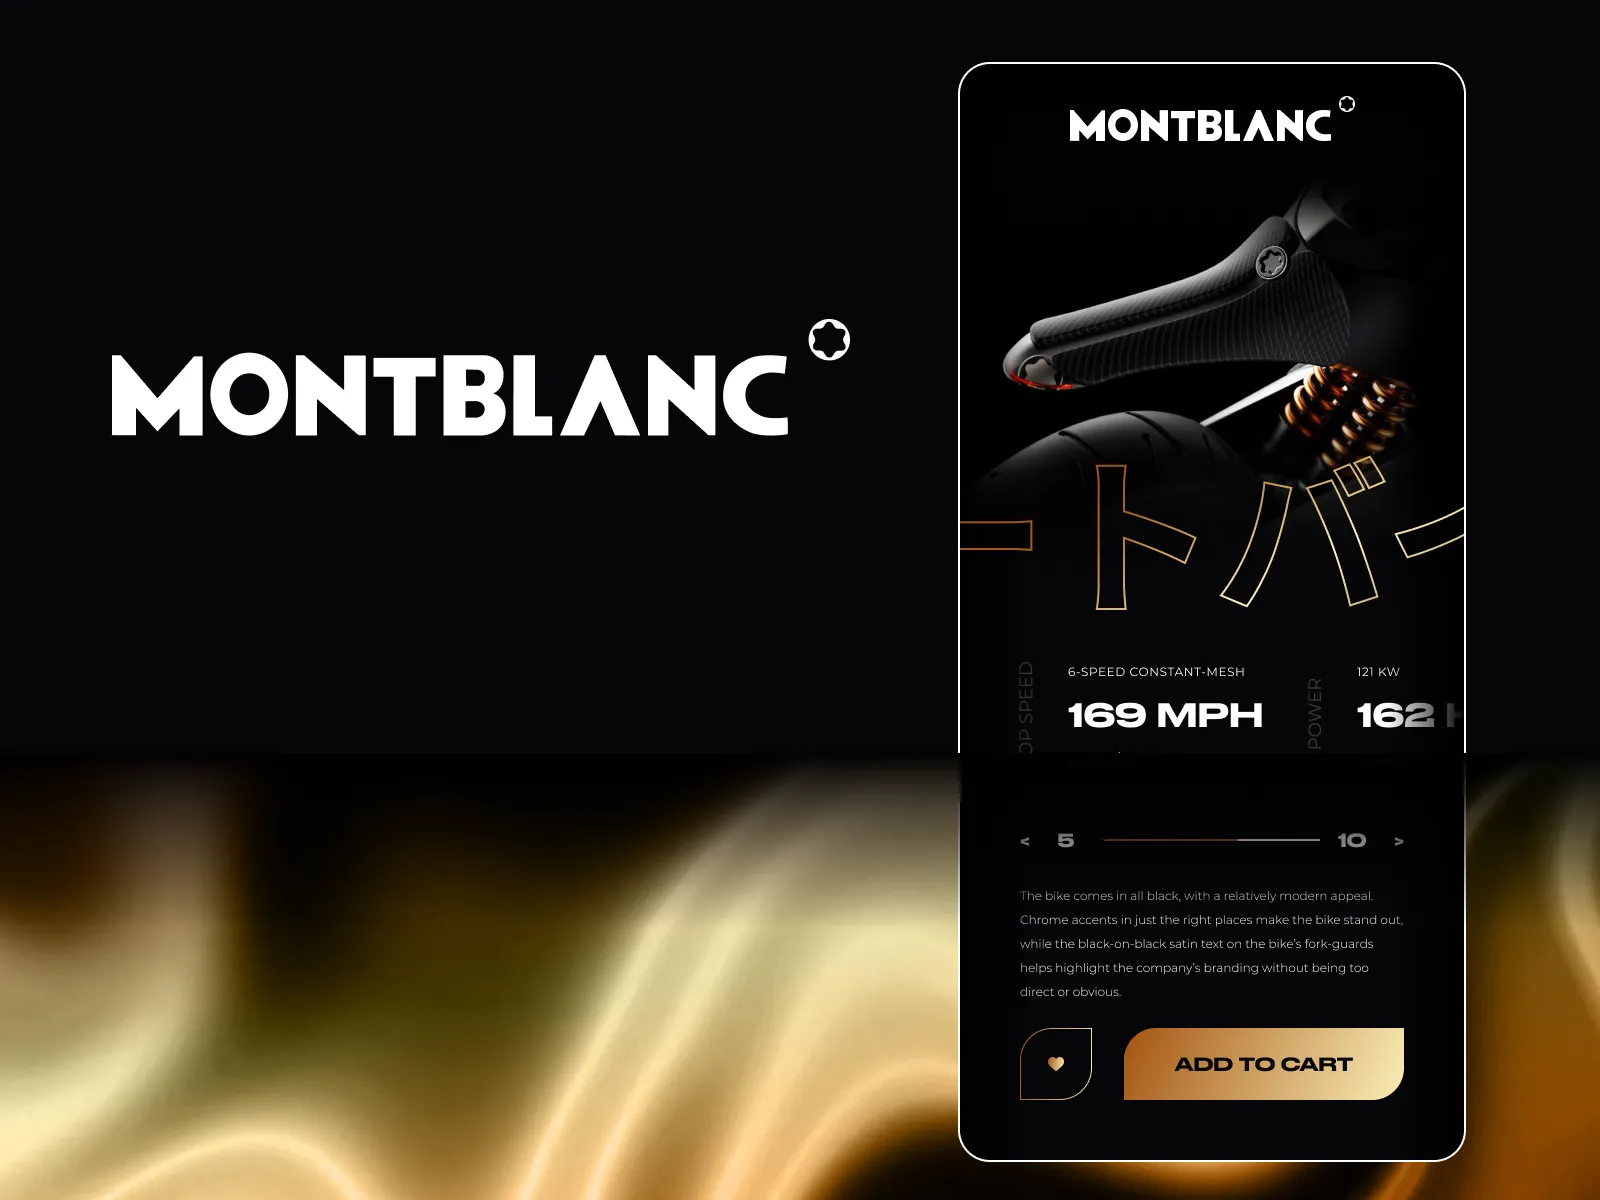 Montblanc � Motorcycle Mobile App for Figma and Adobe XD No 2